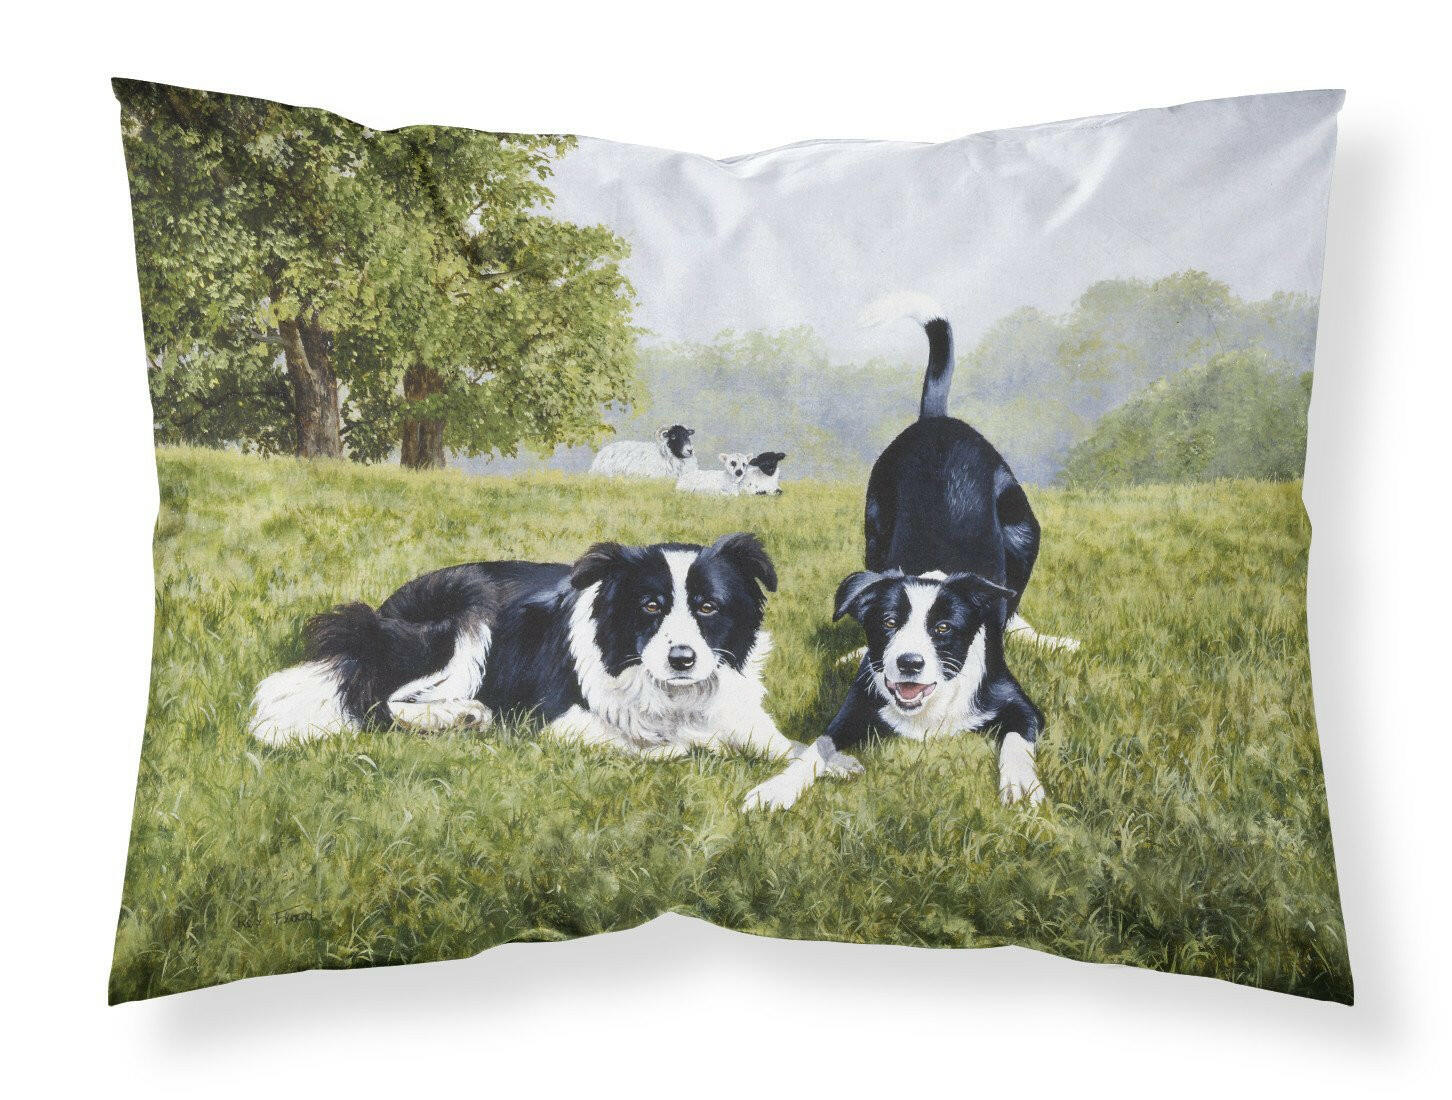 Let's Play Border Collie Fabric Standard Pillowcase FRF0014PILLOWCASE by Caroline's Treasures